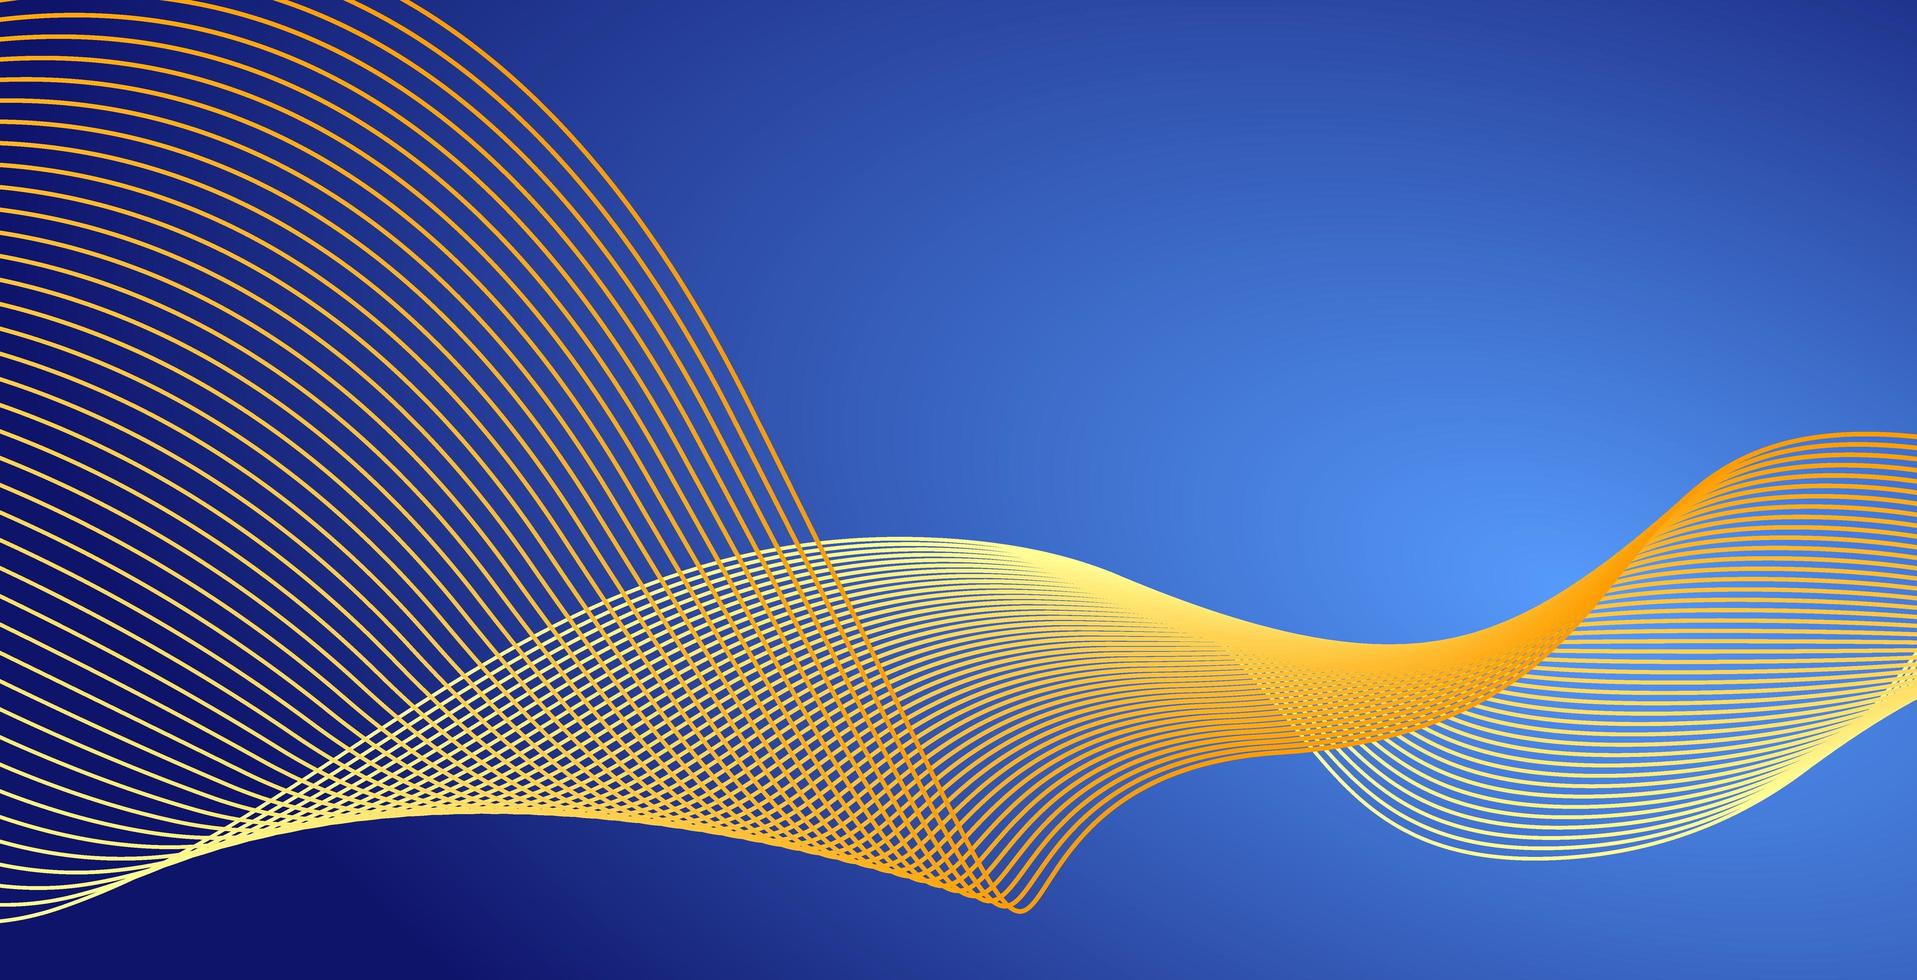 Background design with abstract golden light lines. Curved wavy line photo